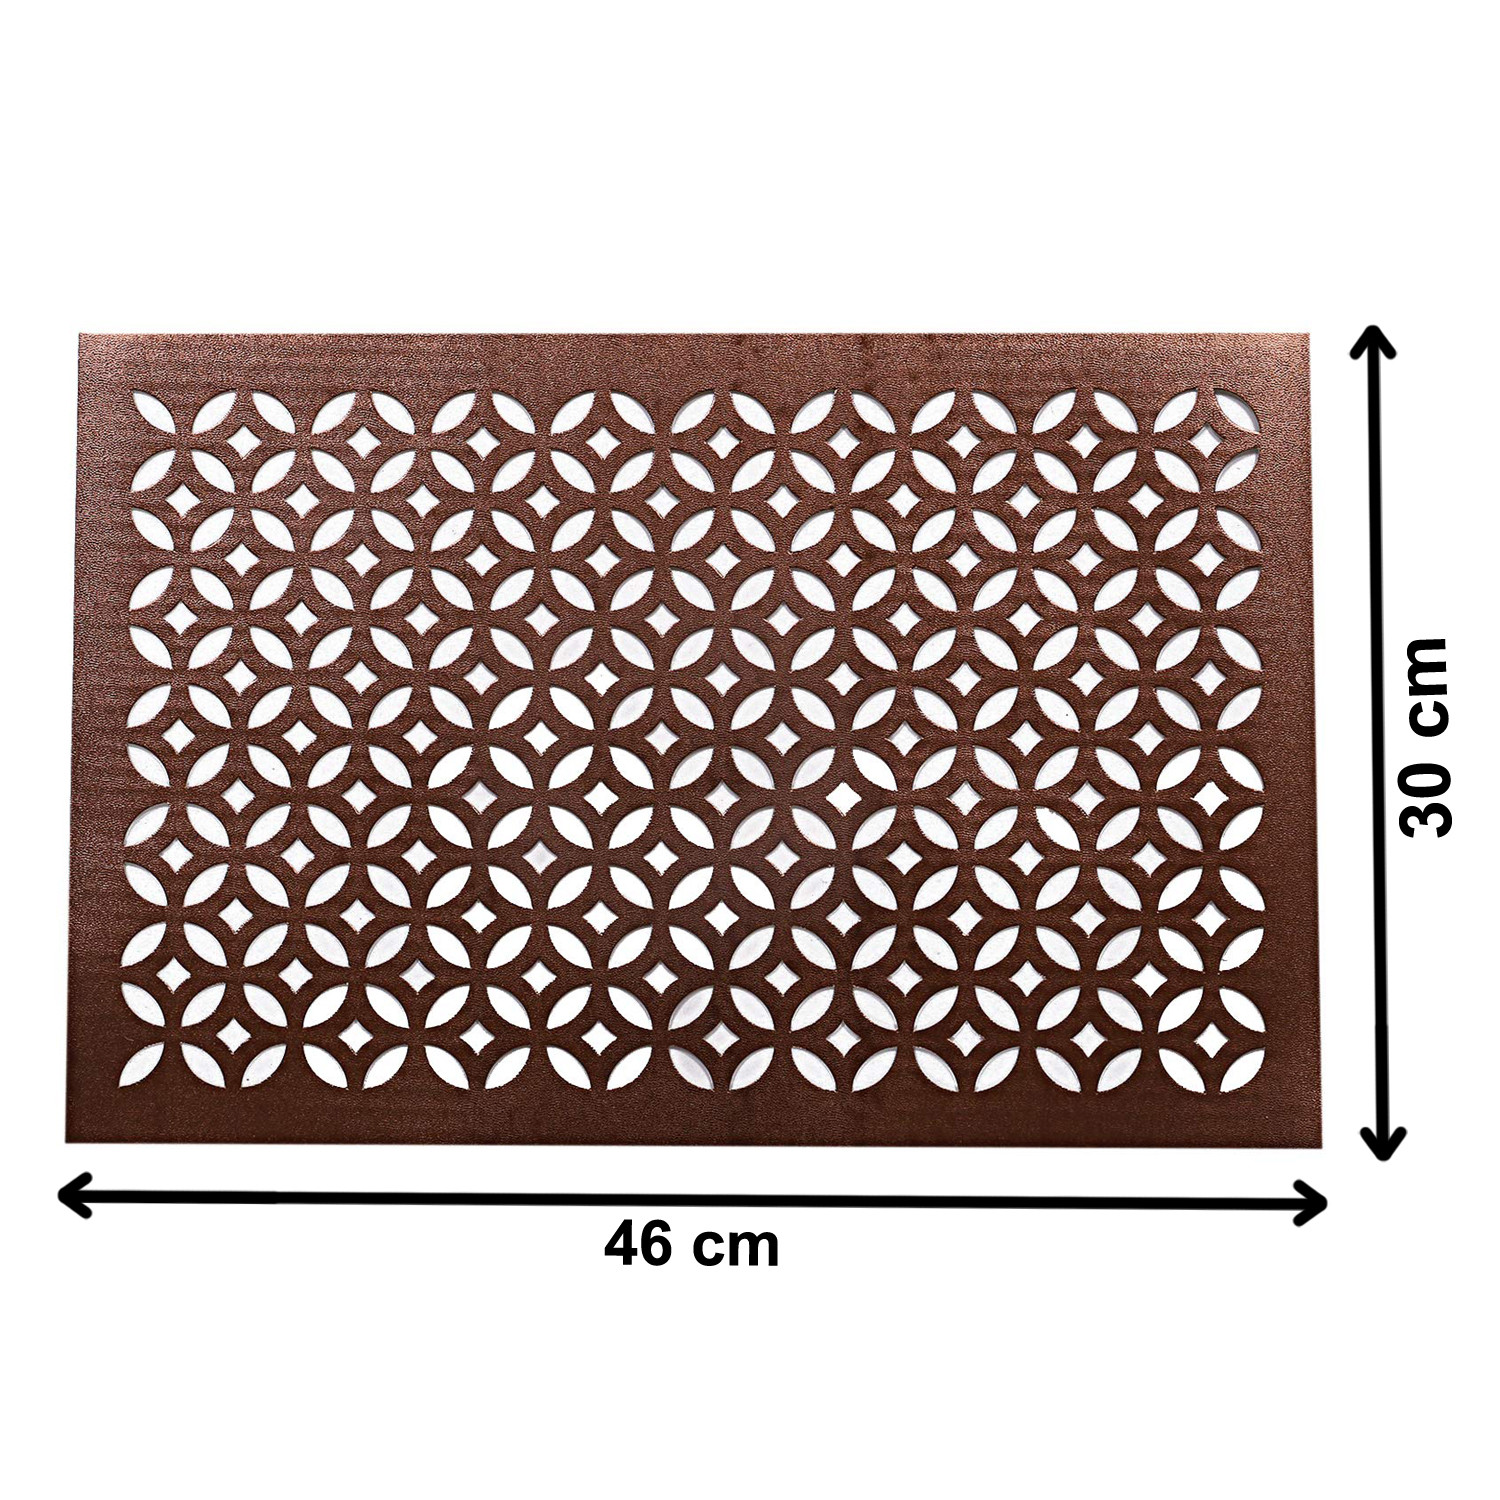 Kuber Industries Rectangular Soft Leather Table Placemats, Set of 4 (Copper)